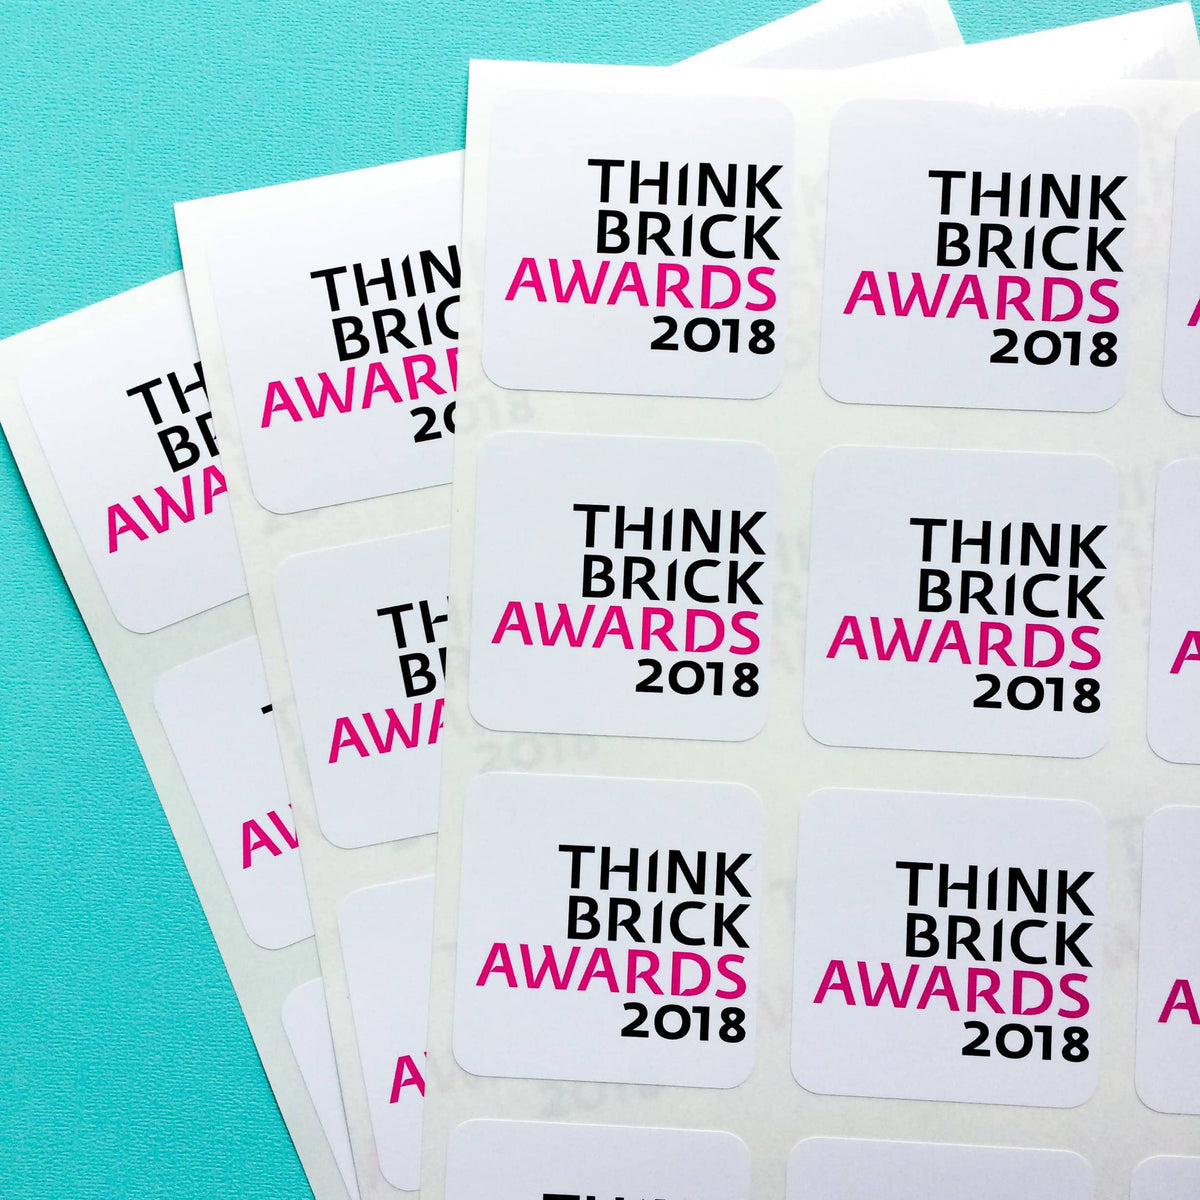 Think Brick Awards 2018 event square sheet label stickers